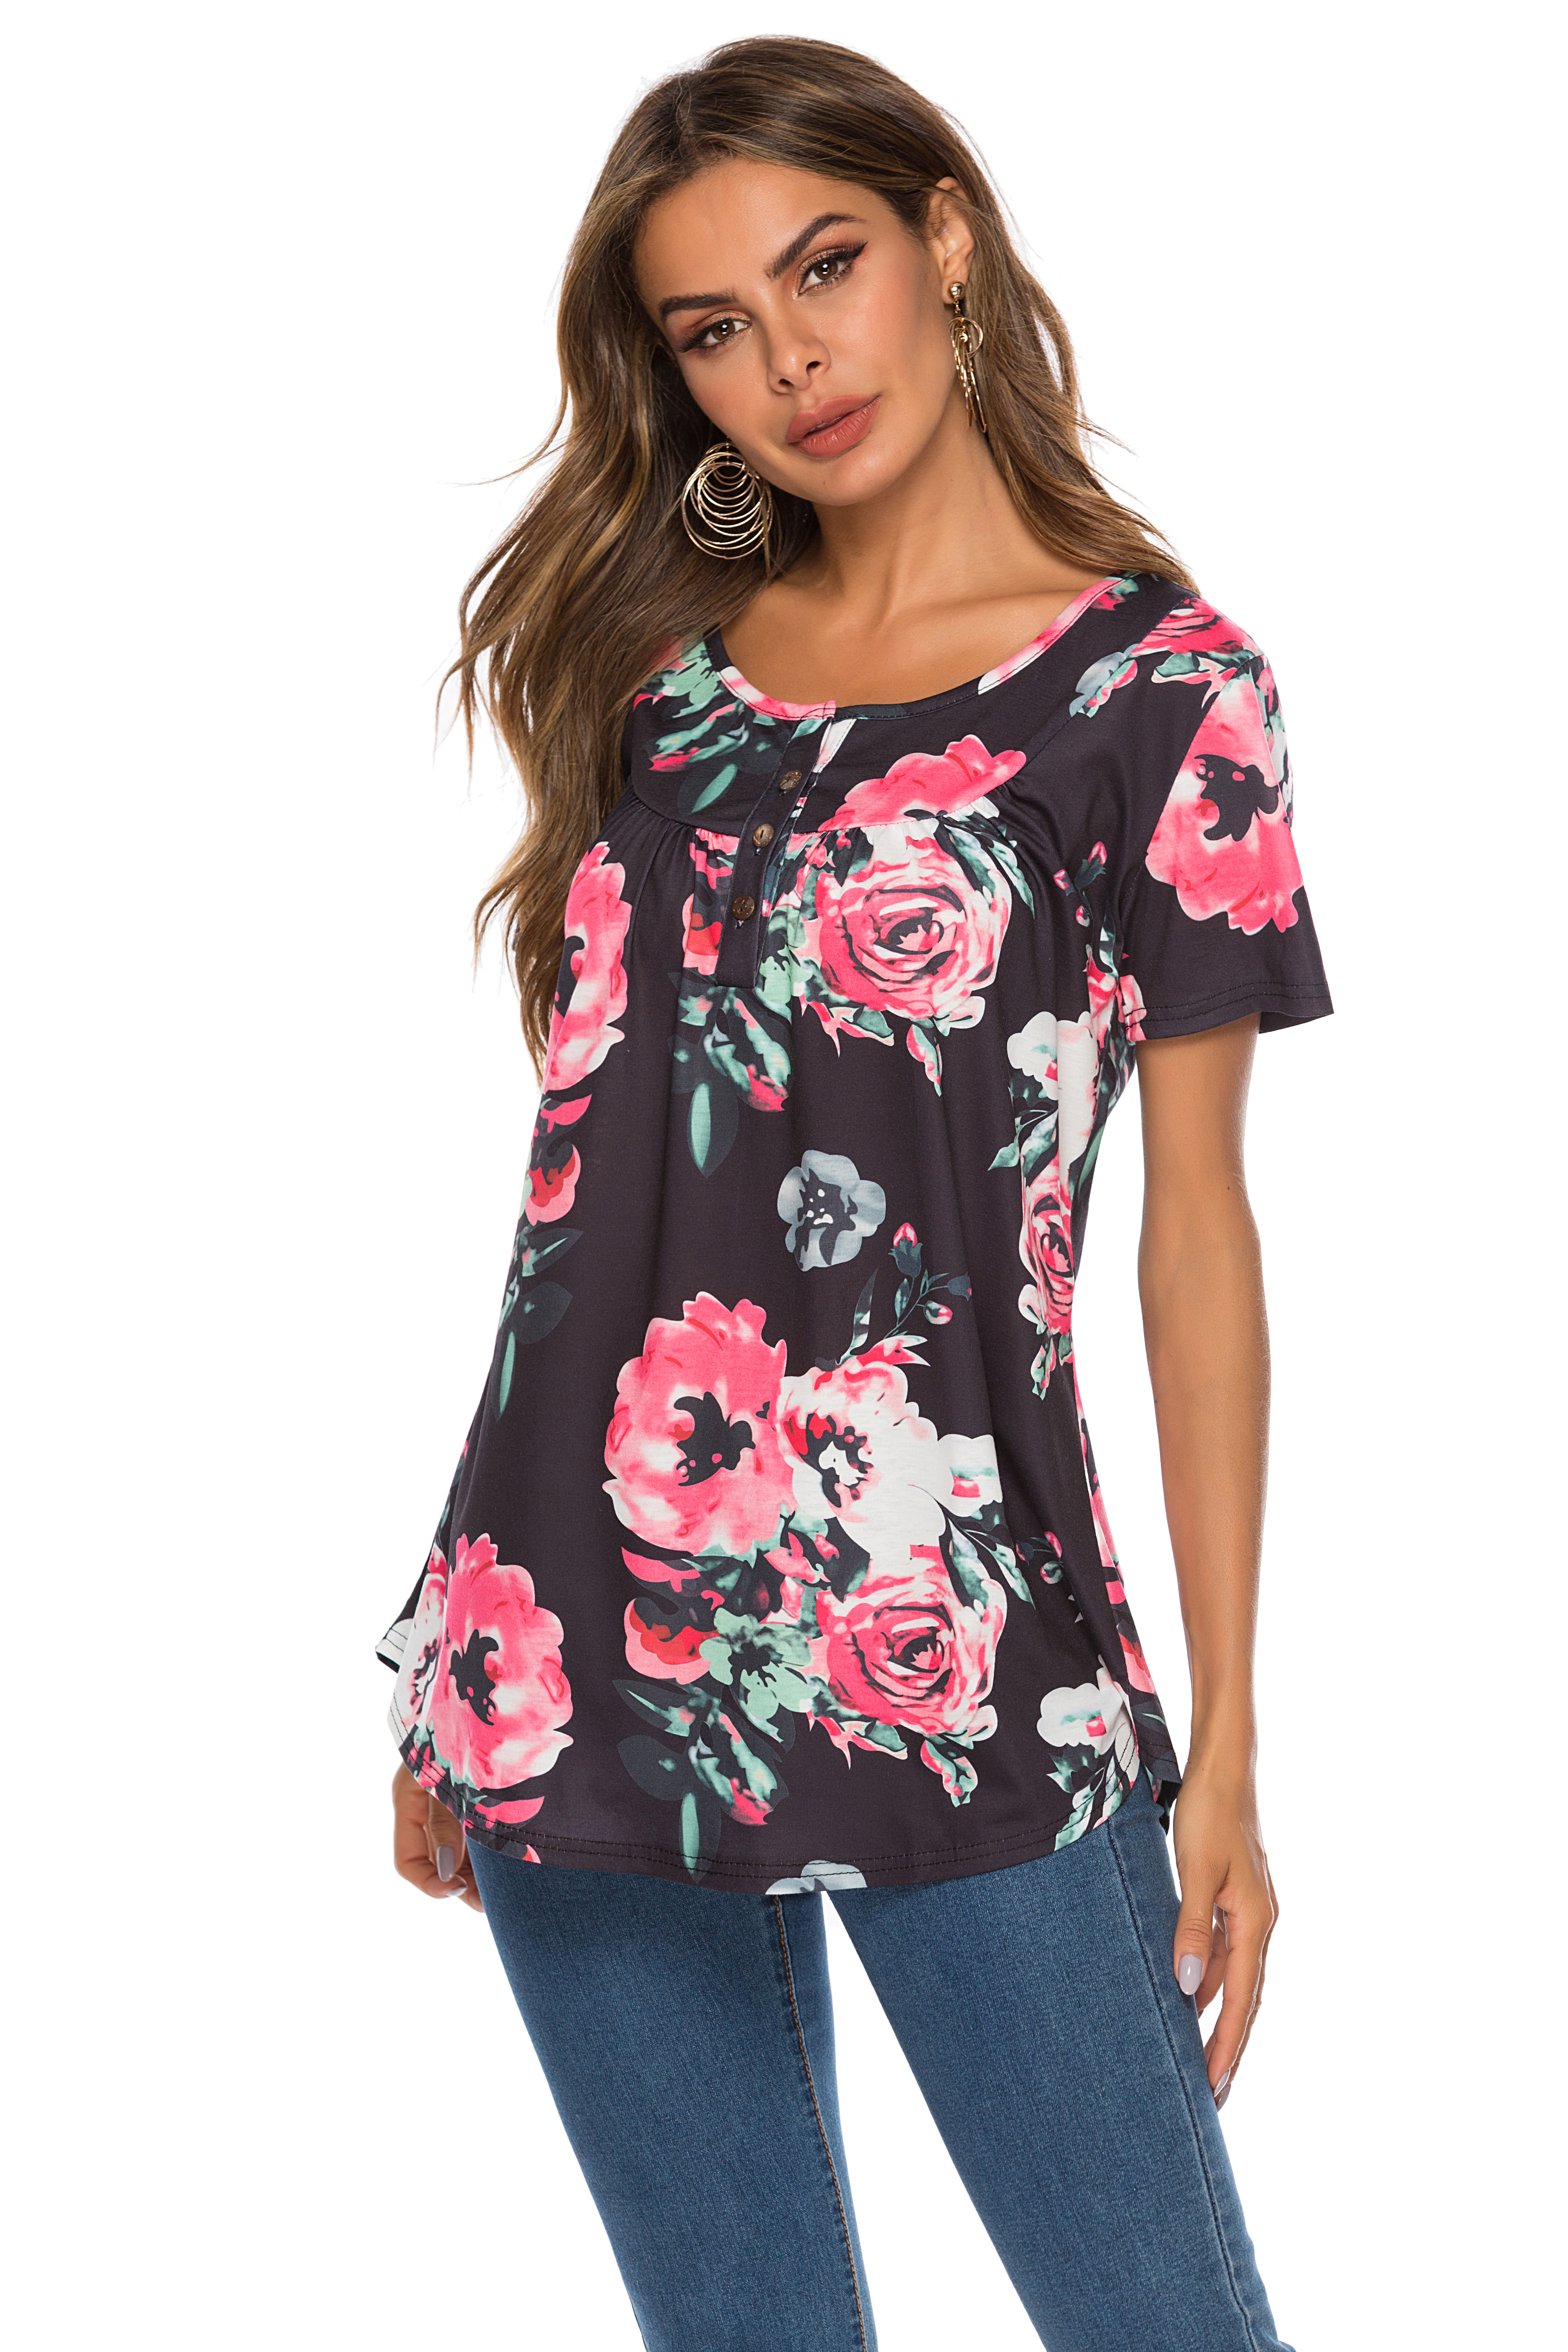 Us Women Loose Casual Floral Print T Shirt Hipster Top Tumblr Summer